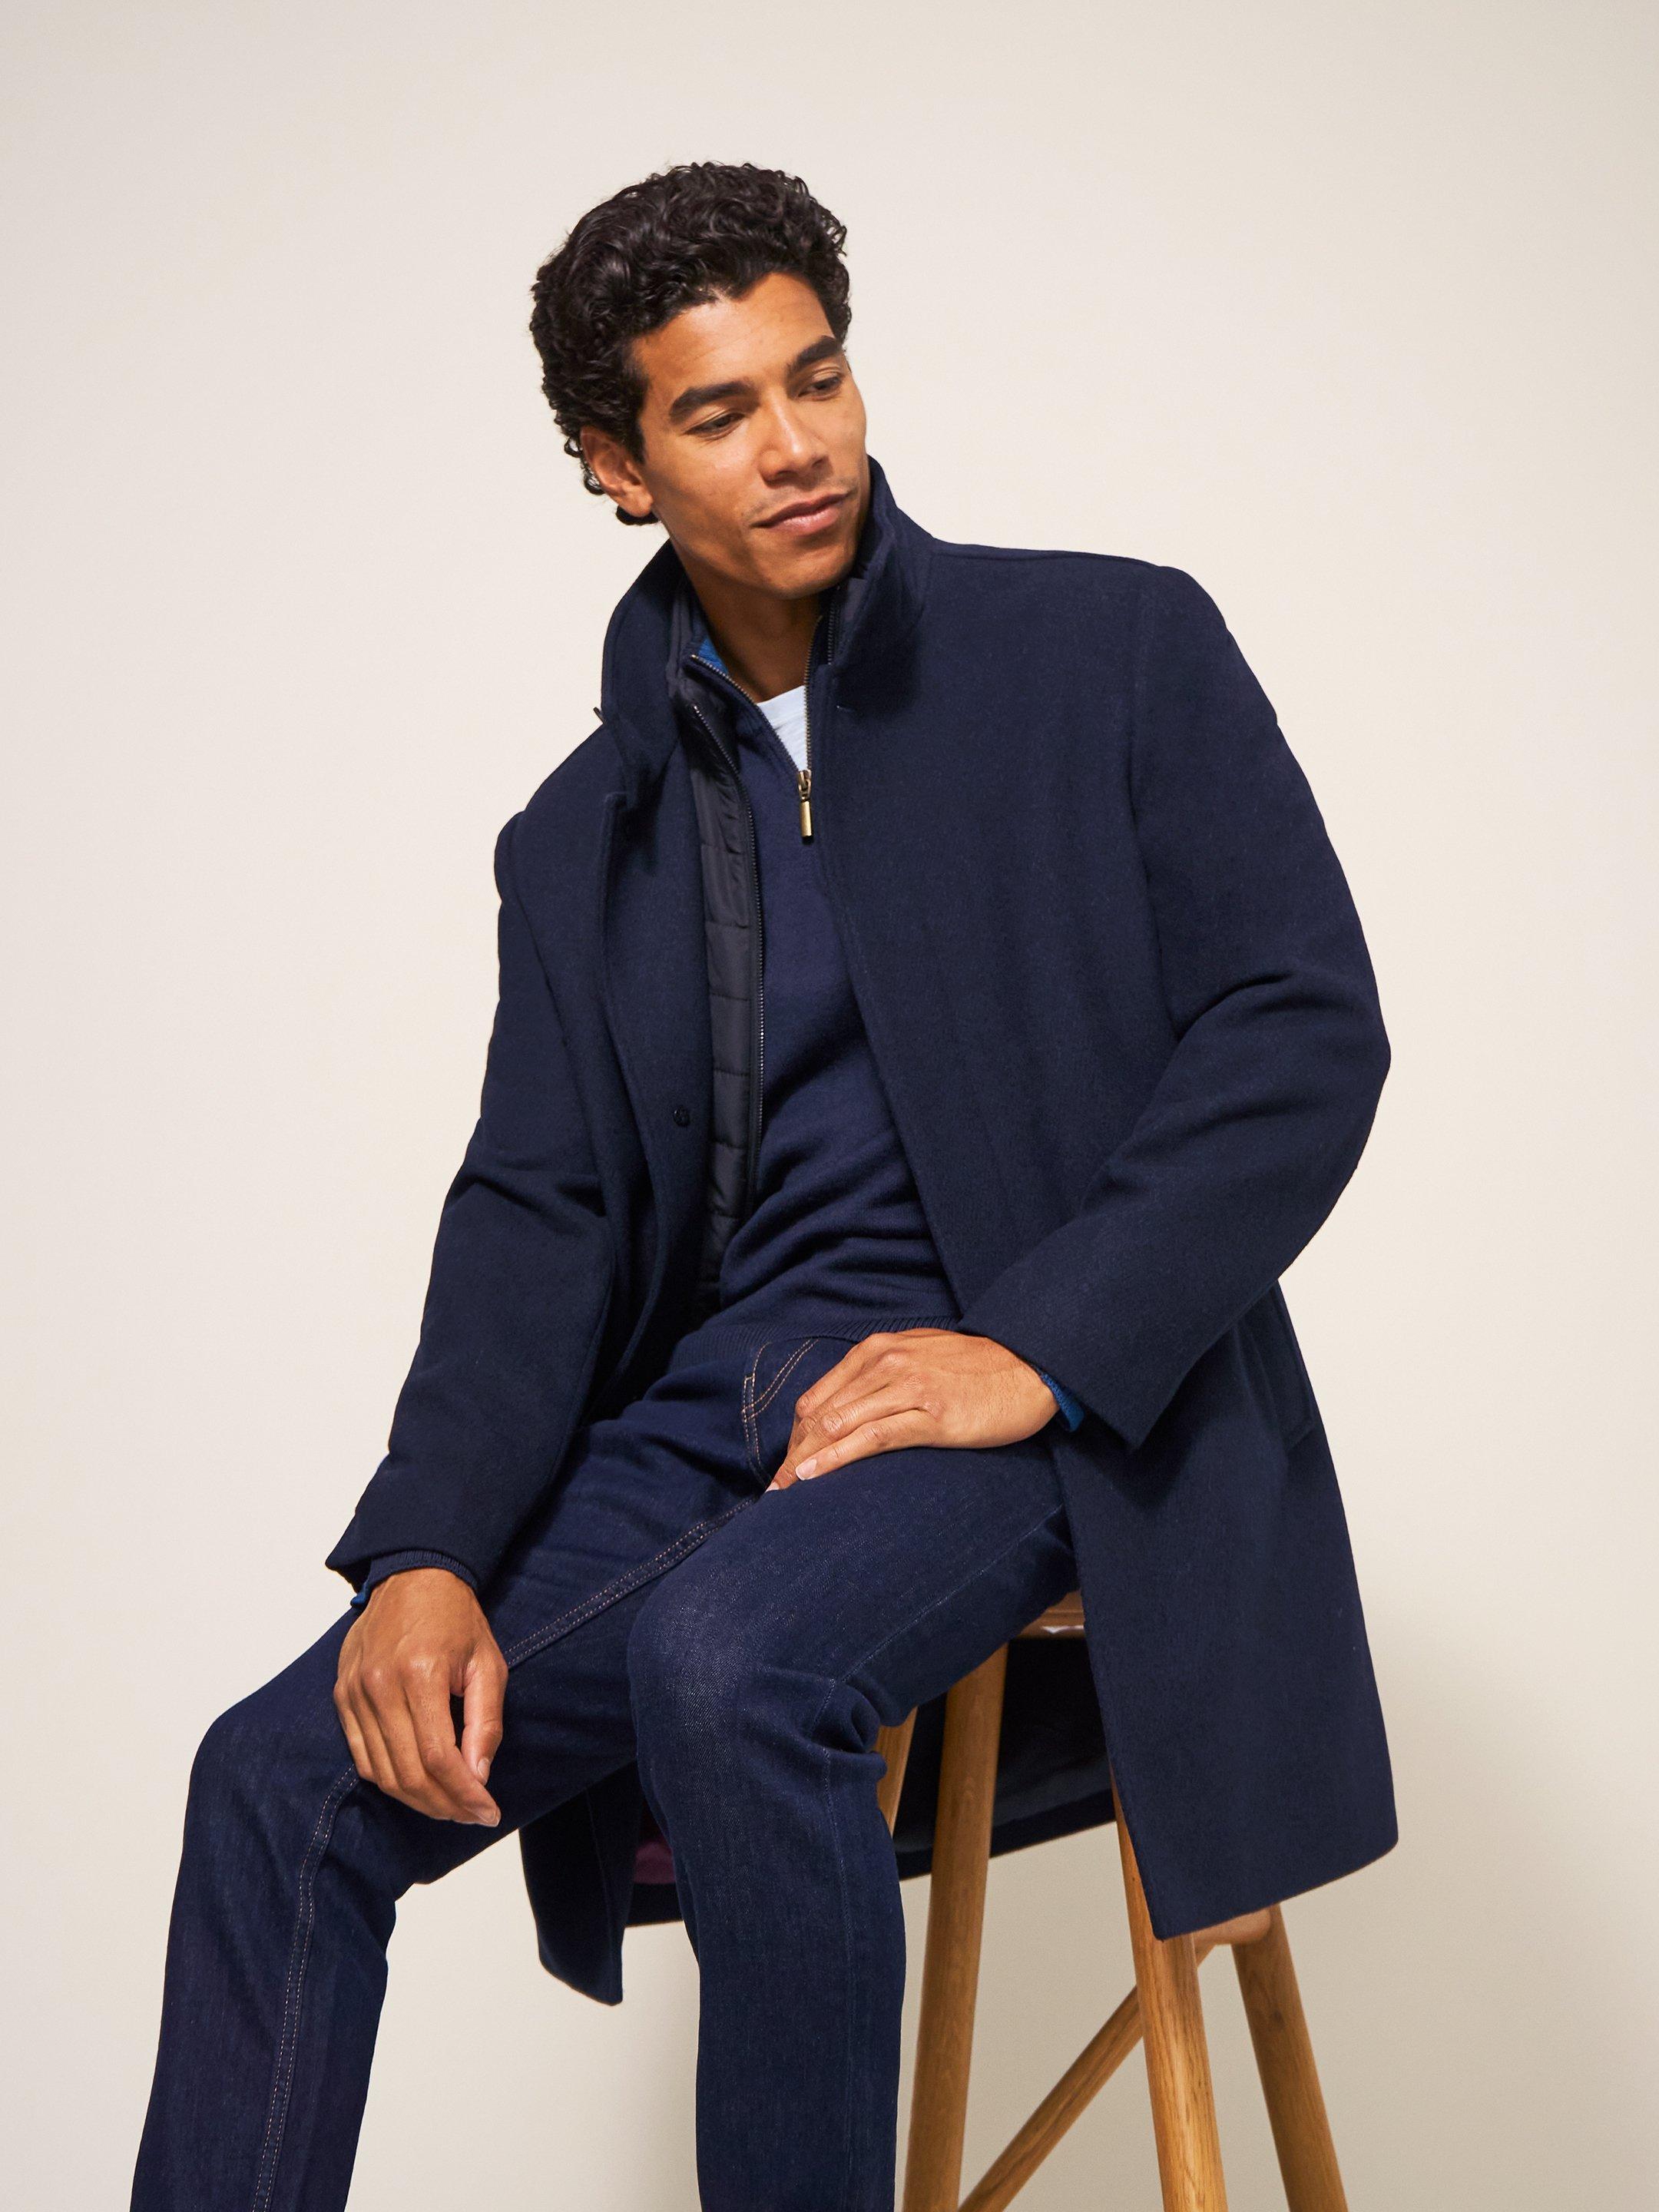 Outerwear and Coats - Men Collection